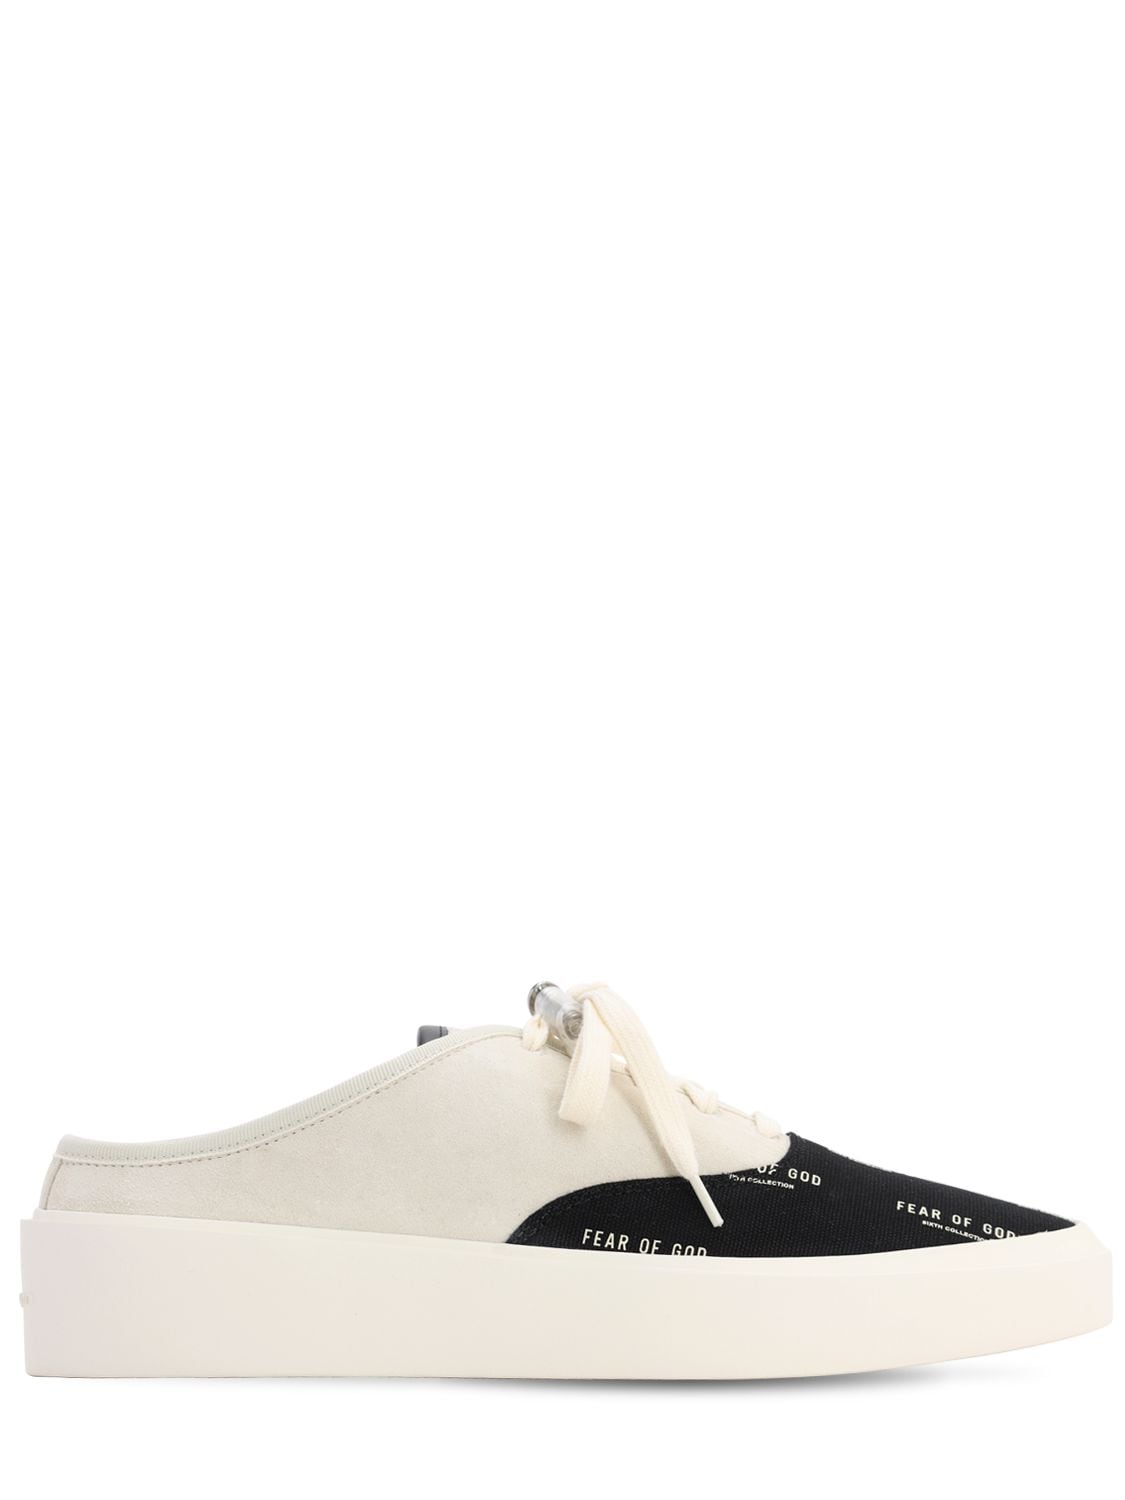 FEAR OF GOD 101 BACKLESS LOGO PRINTED trainers,71IWC7002-MTA10